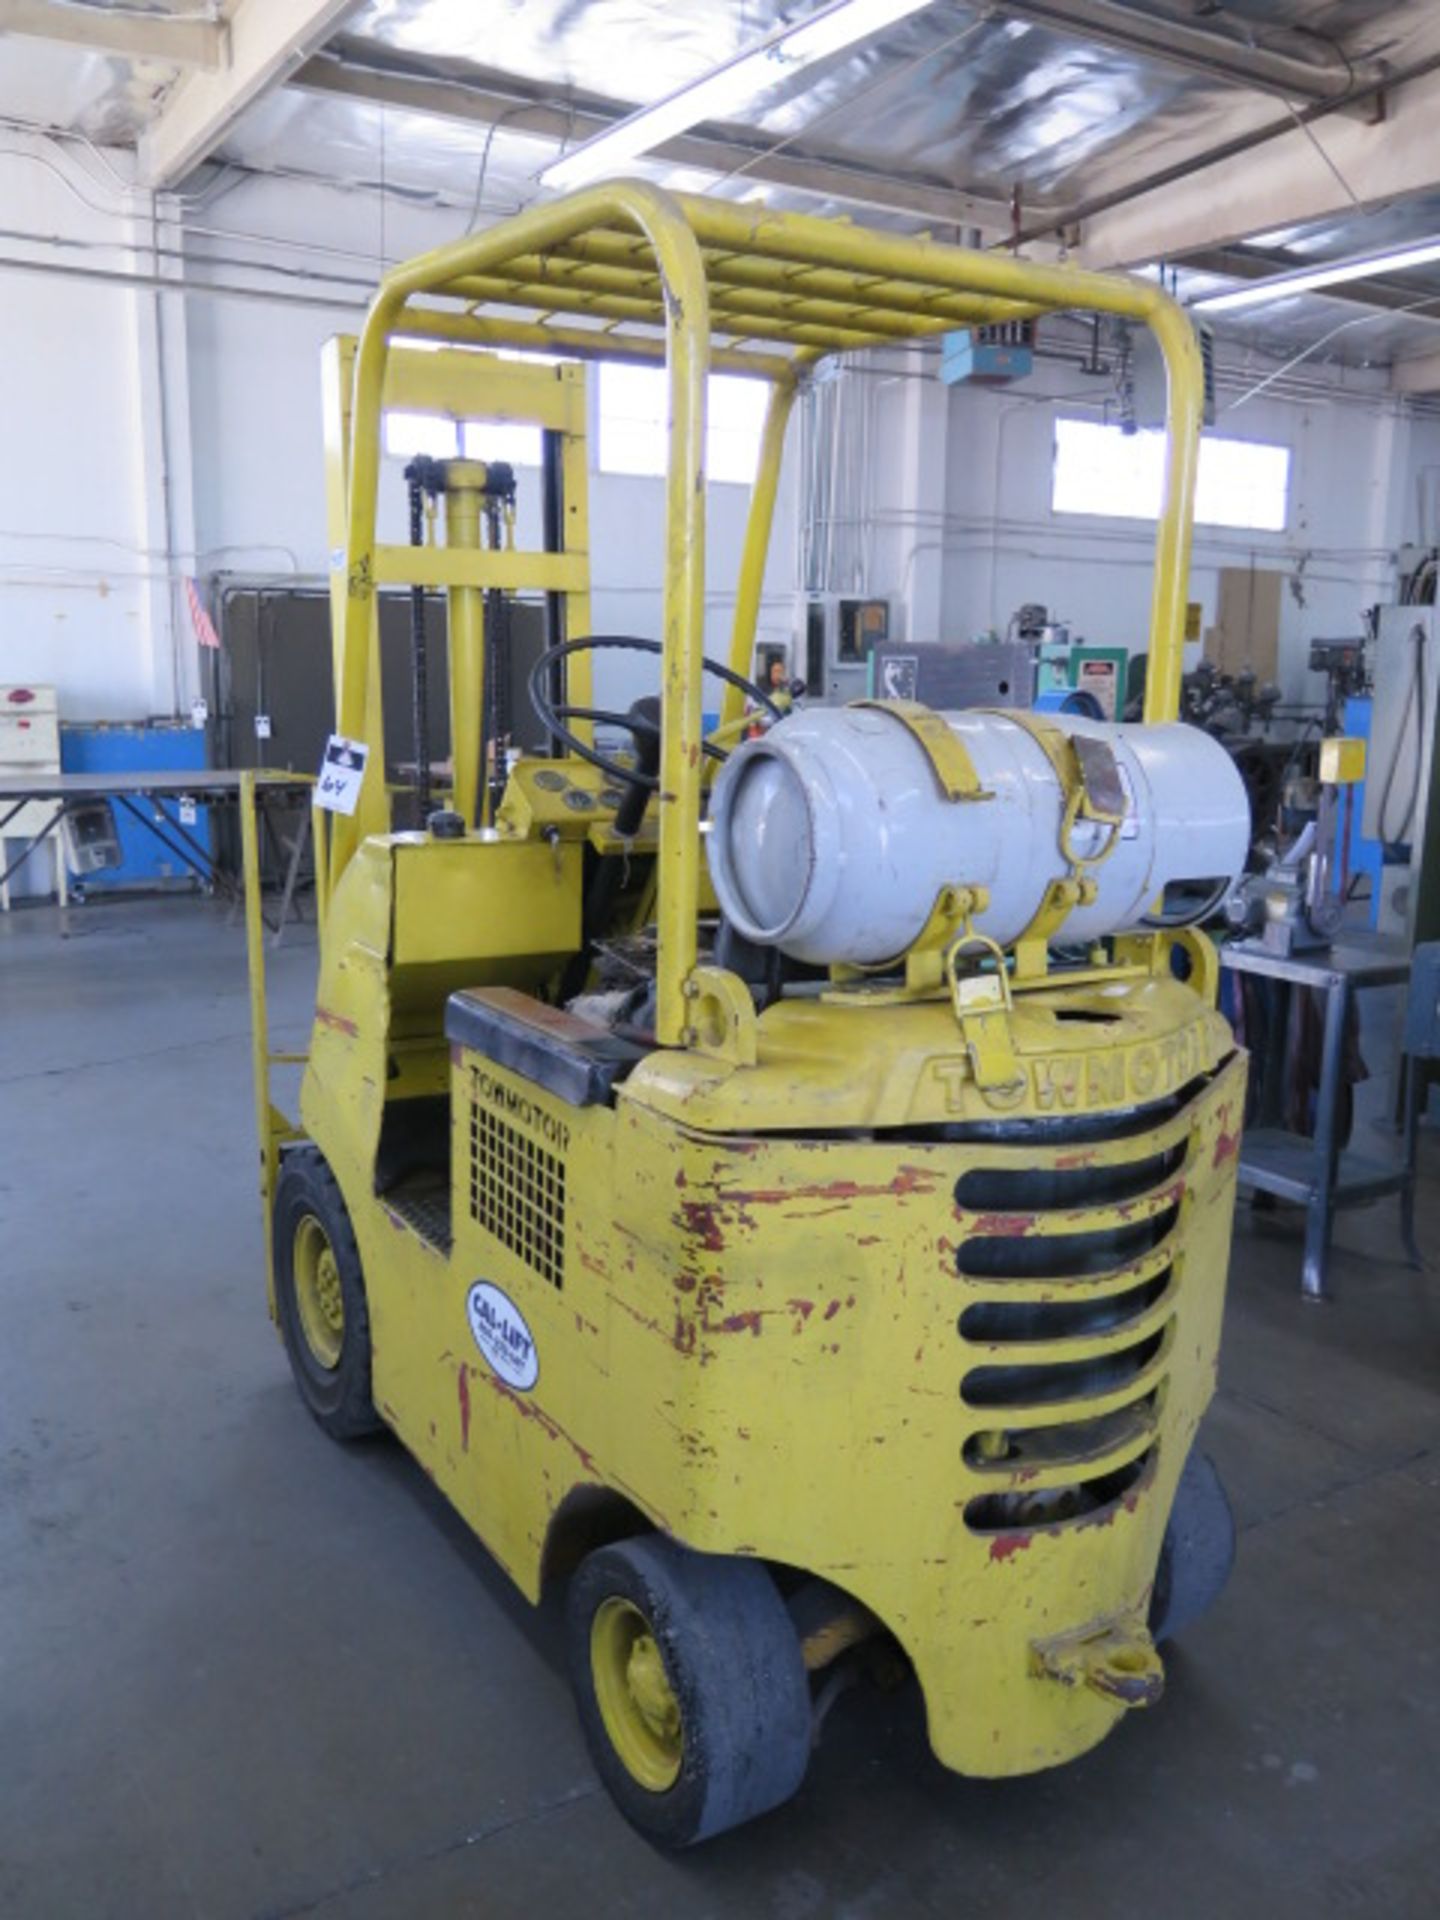 Towmotor mdl. 510P 2000 Lb Cap LPG Forklift s/n 28L660 w/ 2-Stage Mast, 146” Lift Height, Solid - Image 3 of 4